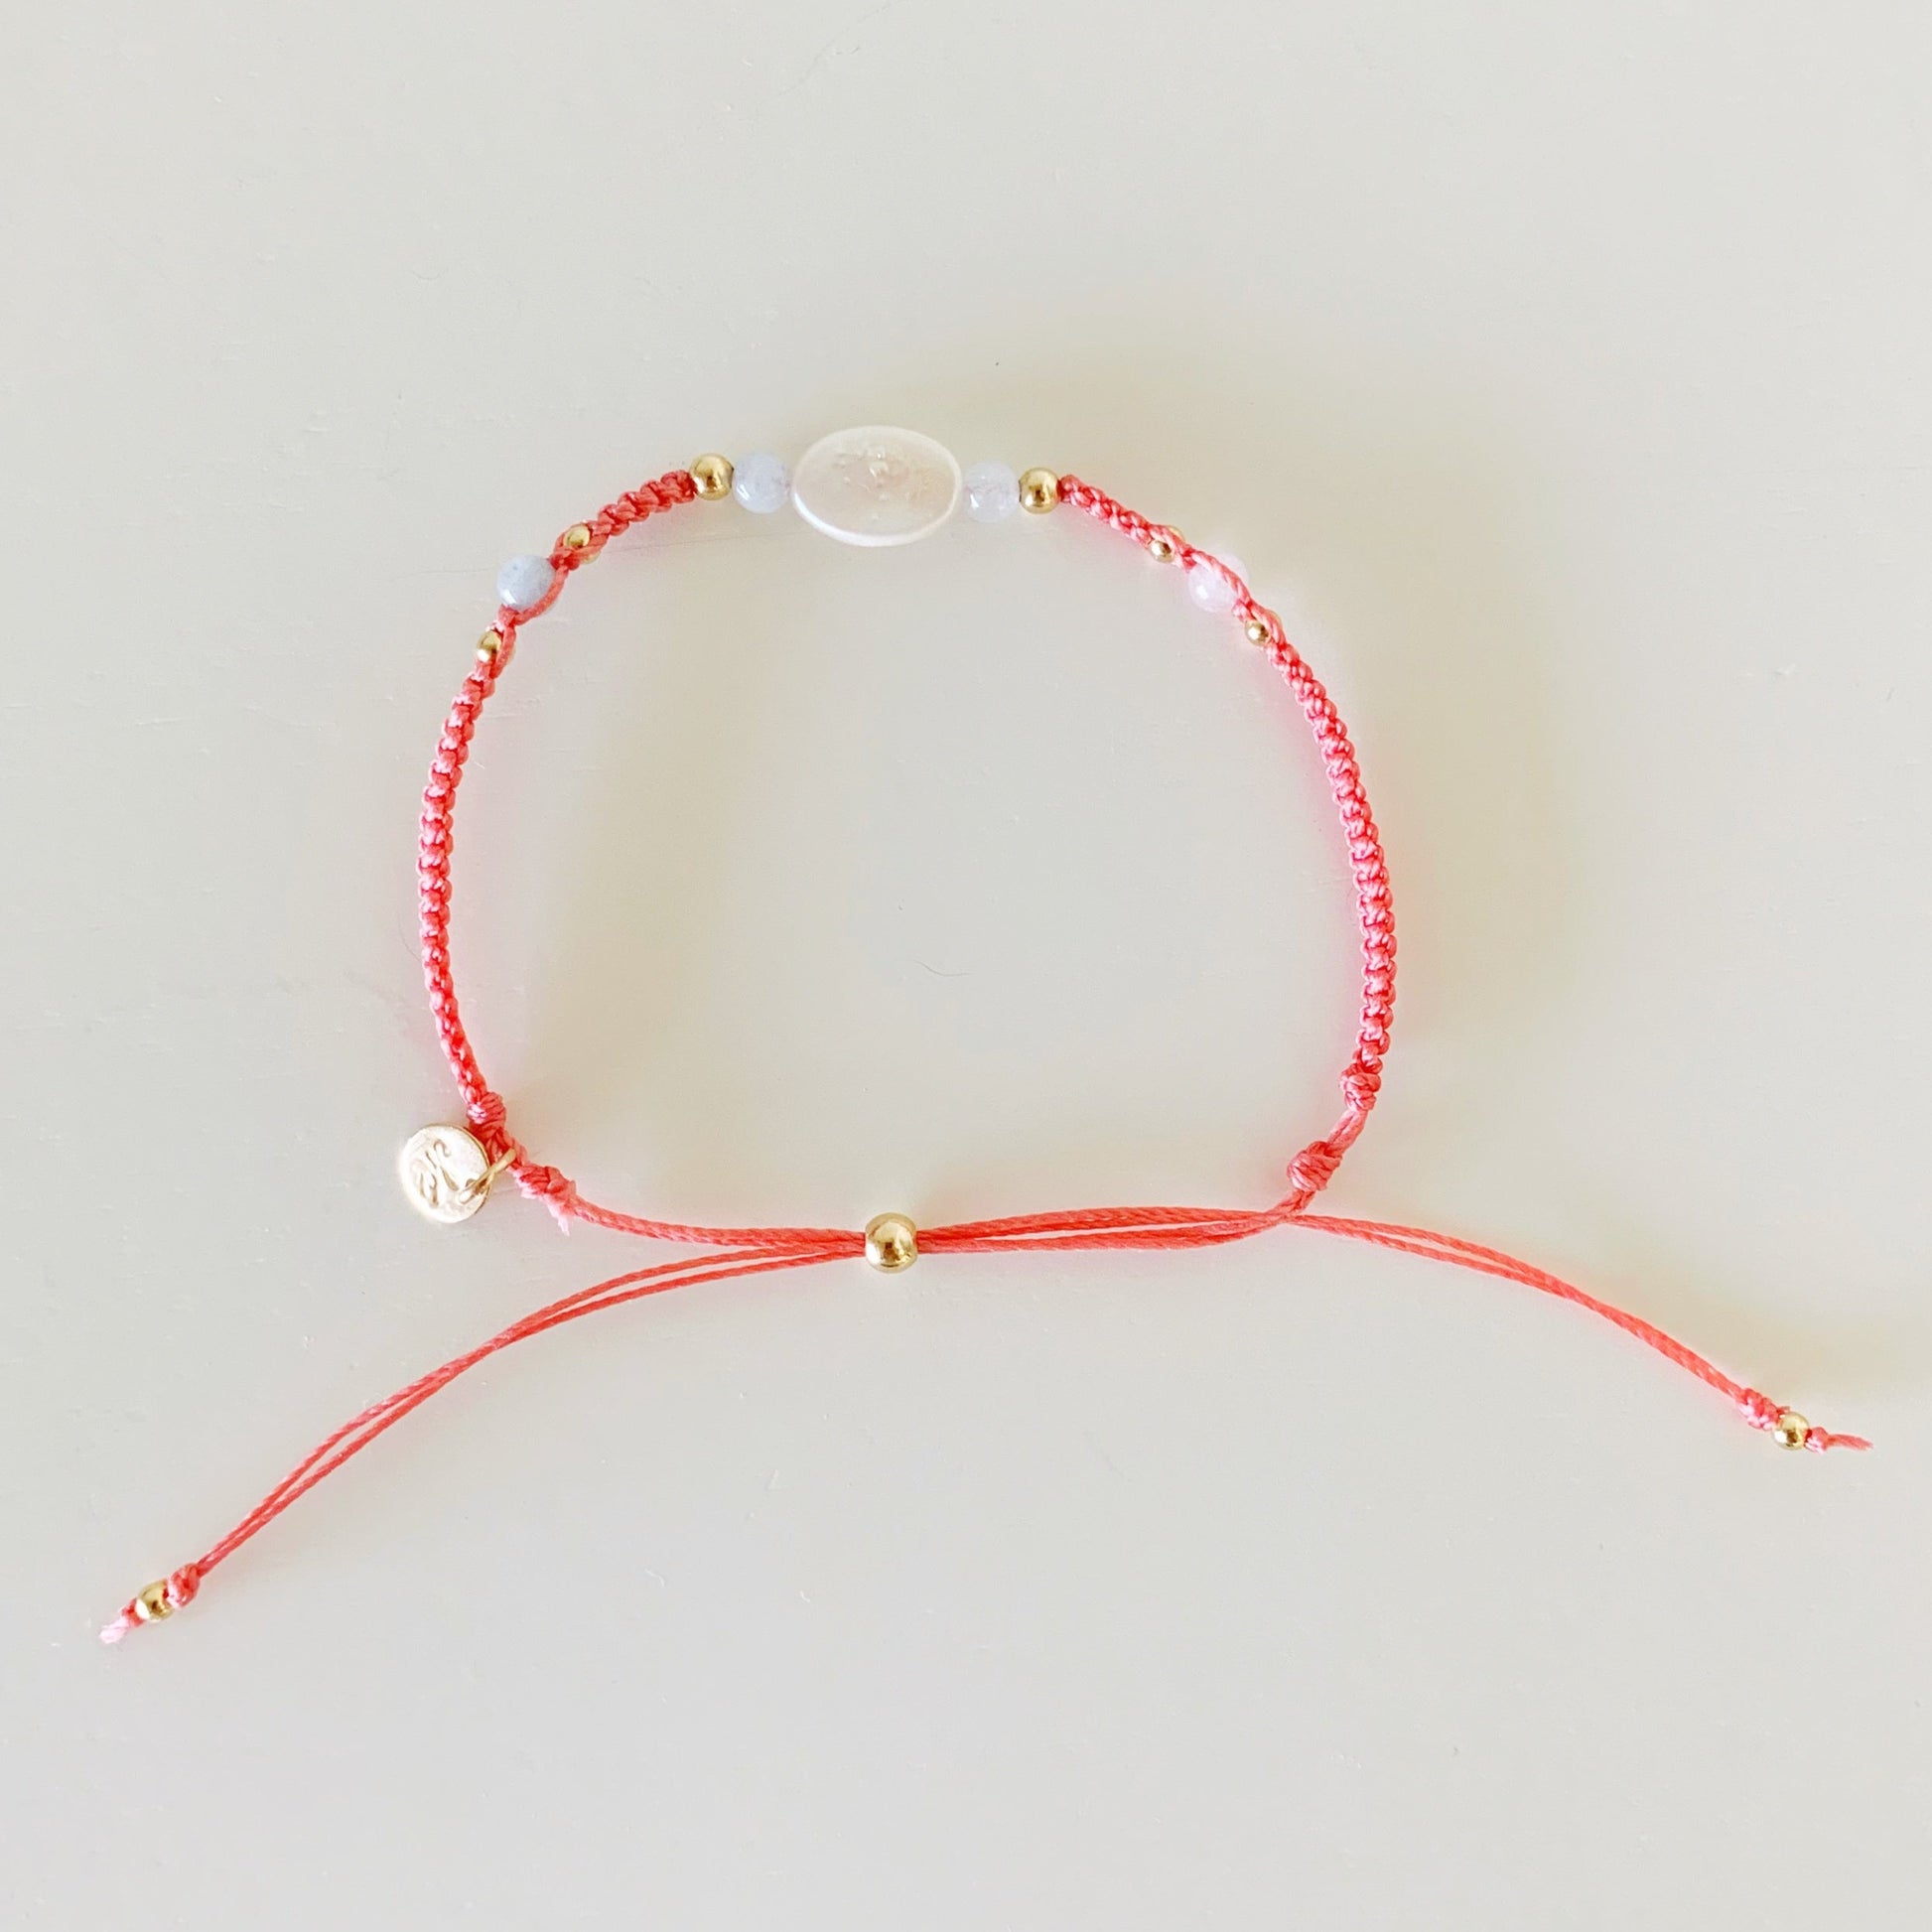 the kinda crabby bracelet by mermaids and madeleines is an adjustable macrame style bracelet designed with terra cotta color cord with a freshwater oval shaped pearl at the center with 4mm aquamarine beads on either side. this bracelet is photographed from the top down on a white surface